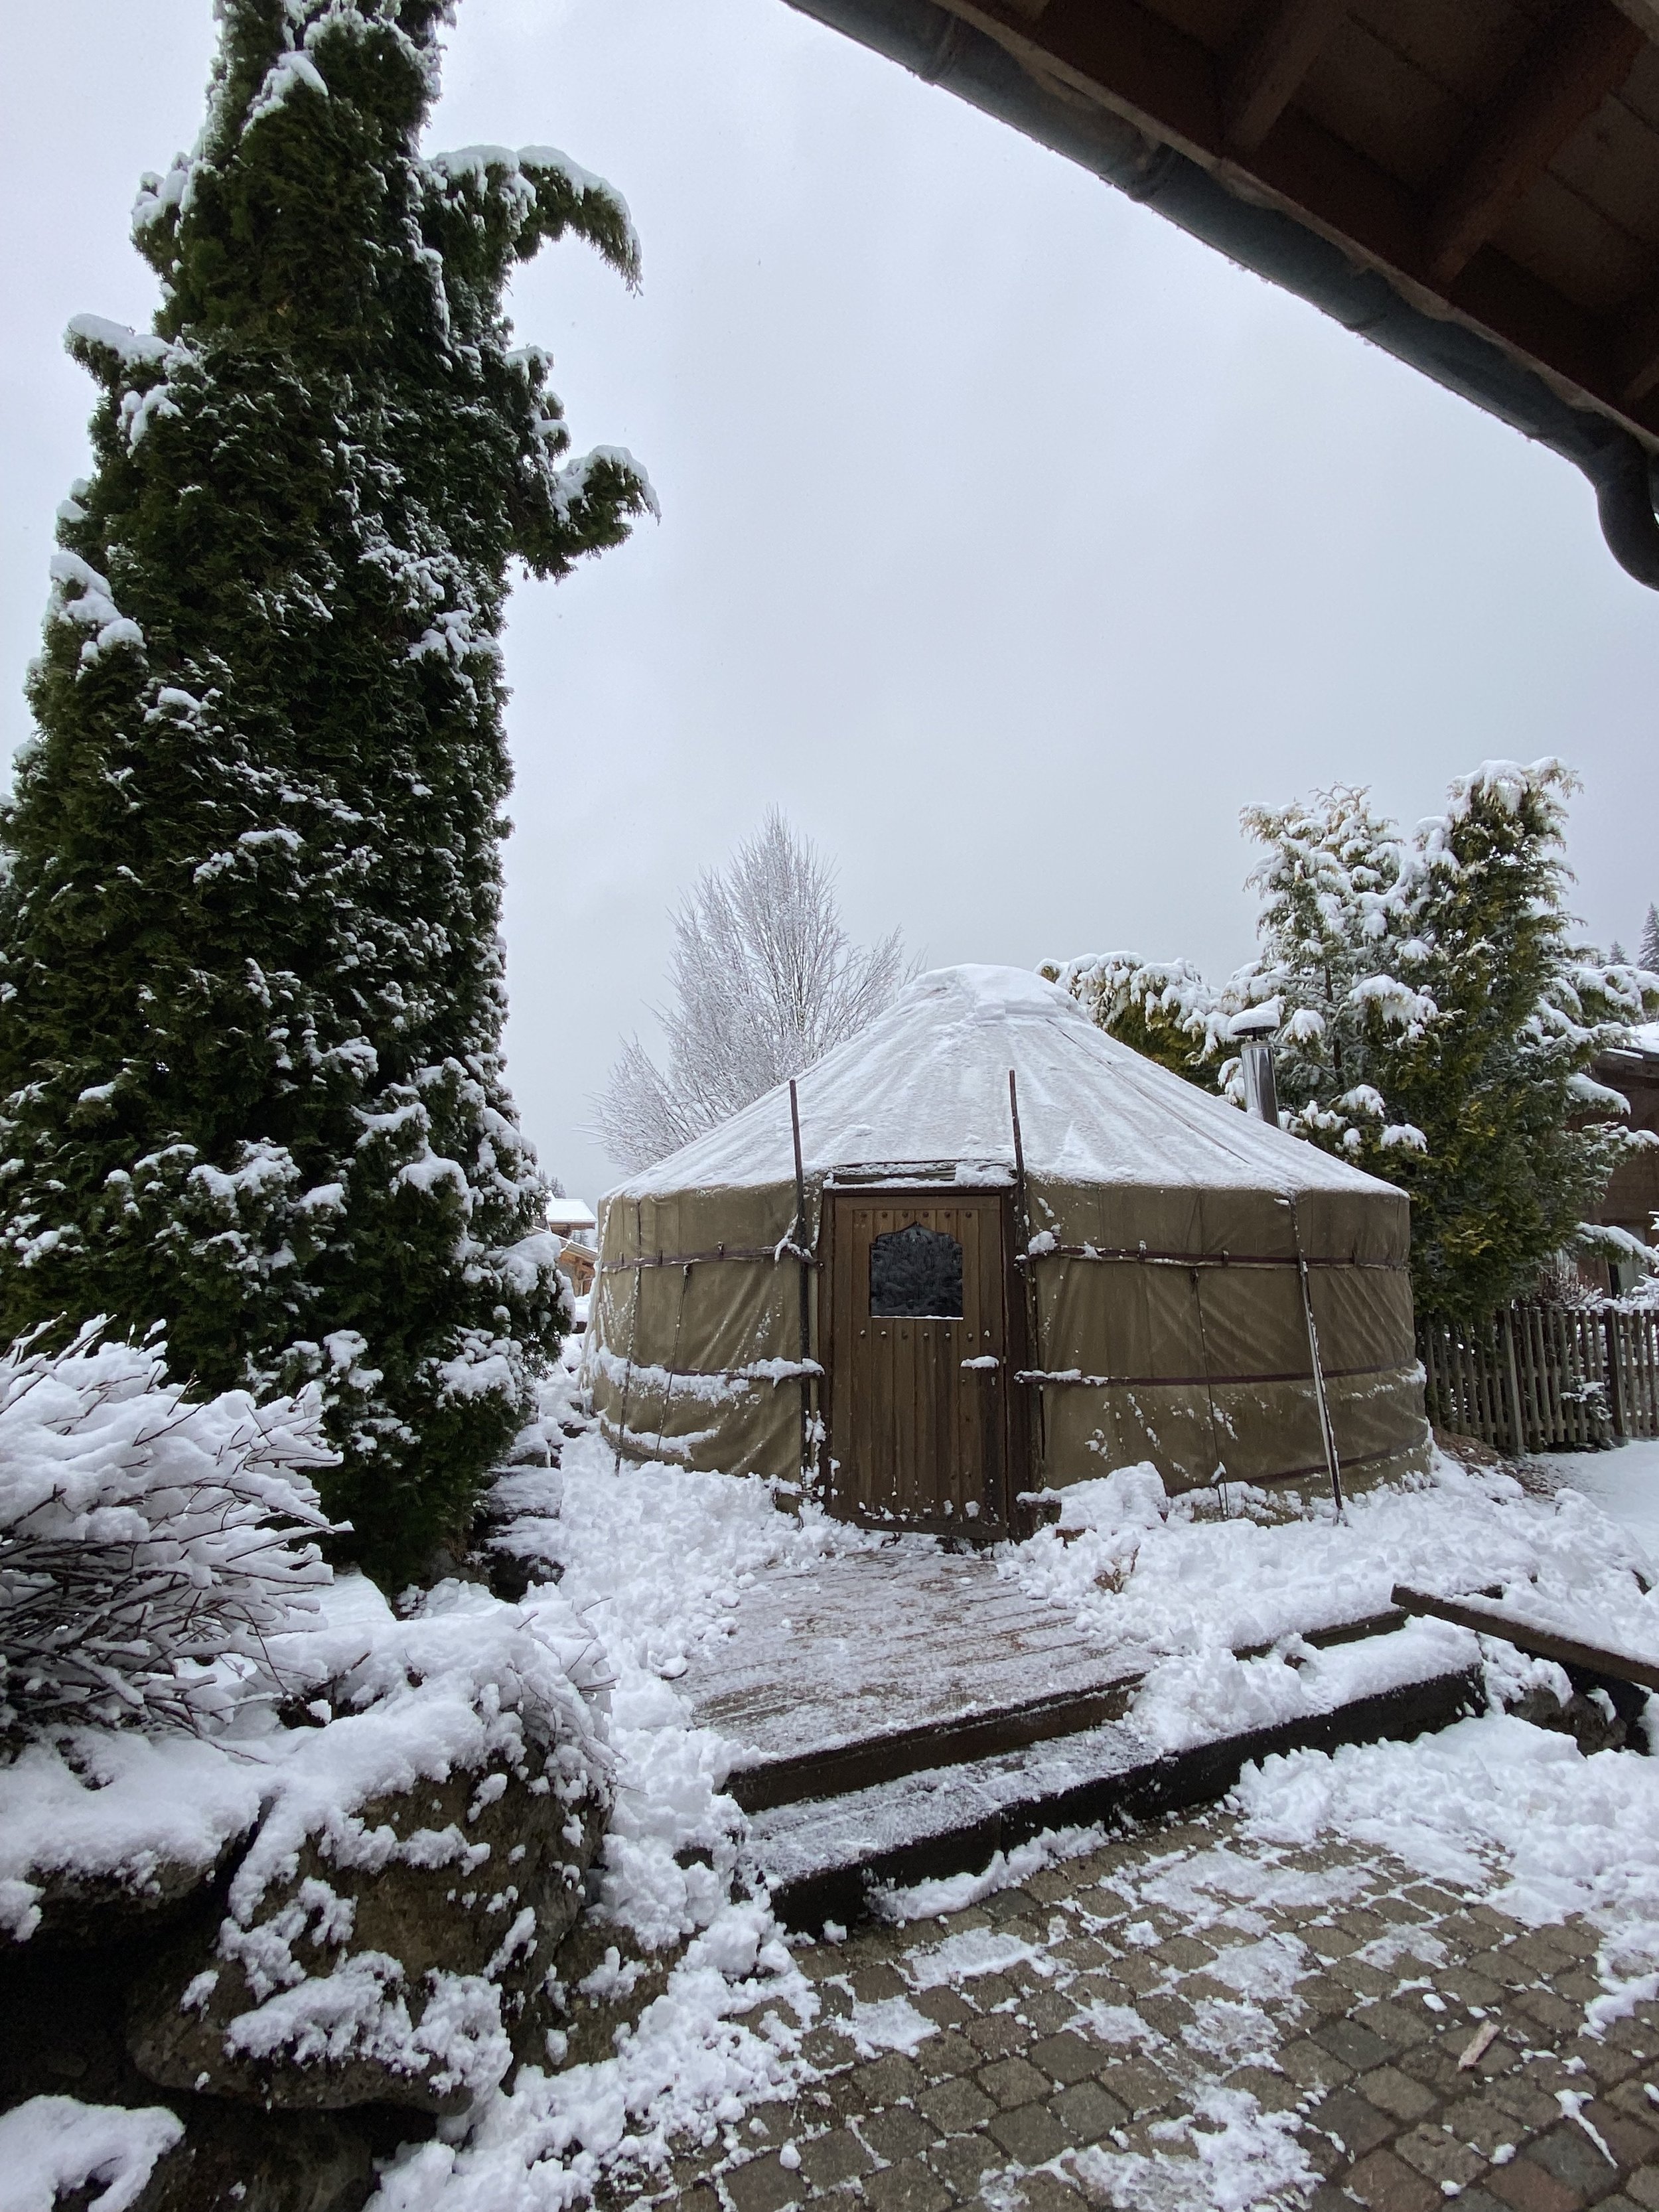 The massage hut at Chilly Powder. A wooden round yurt in the back patio area